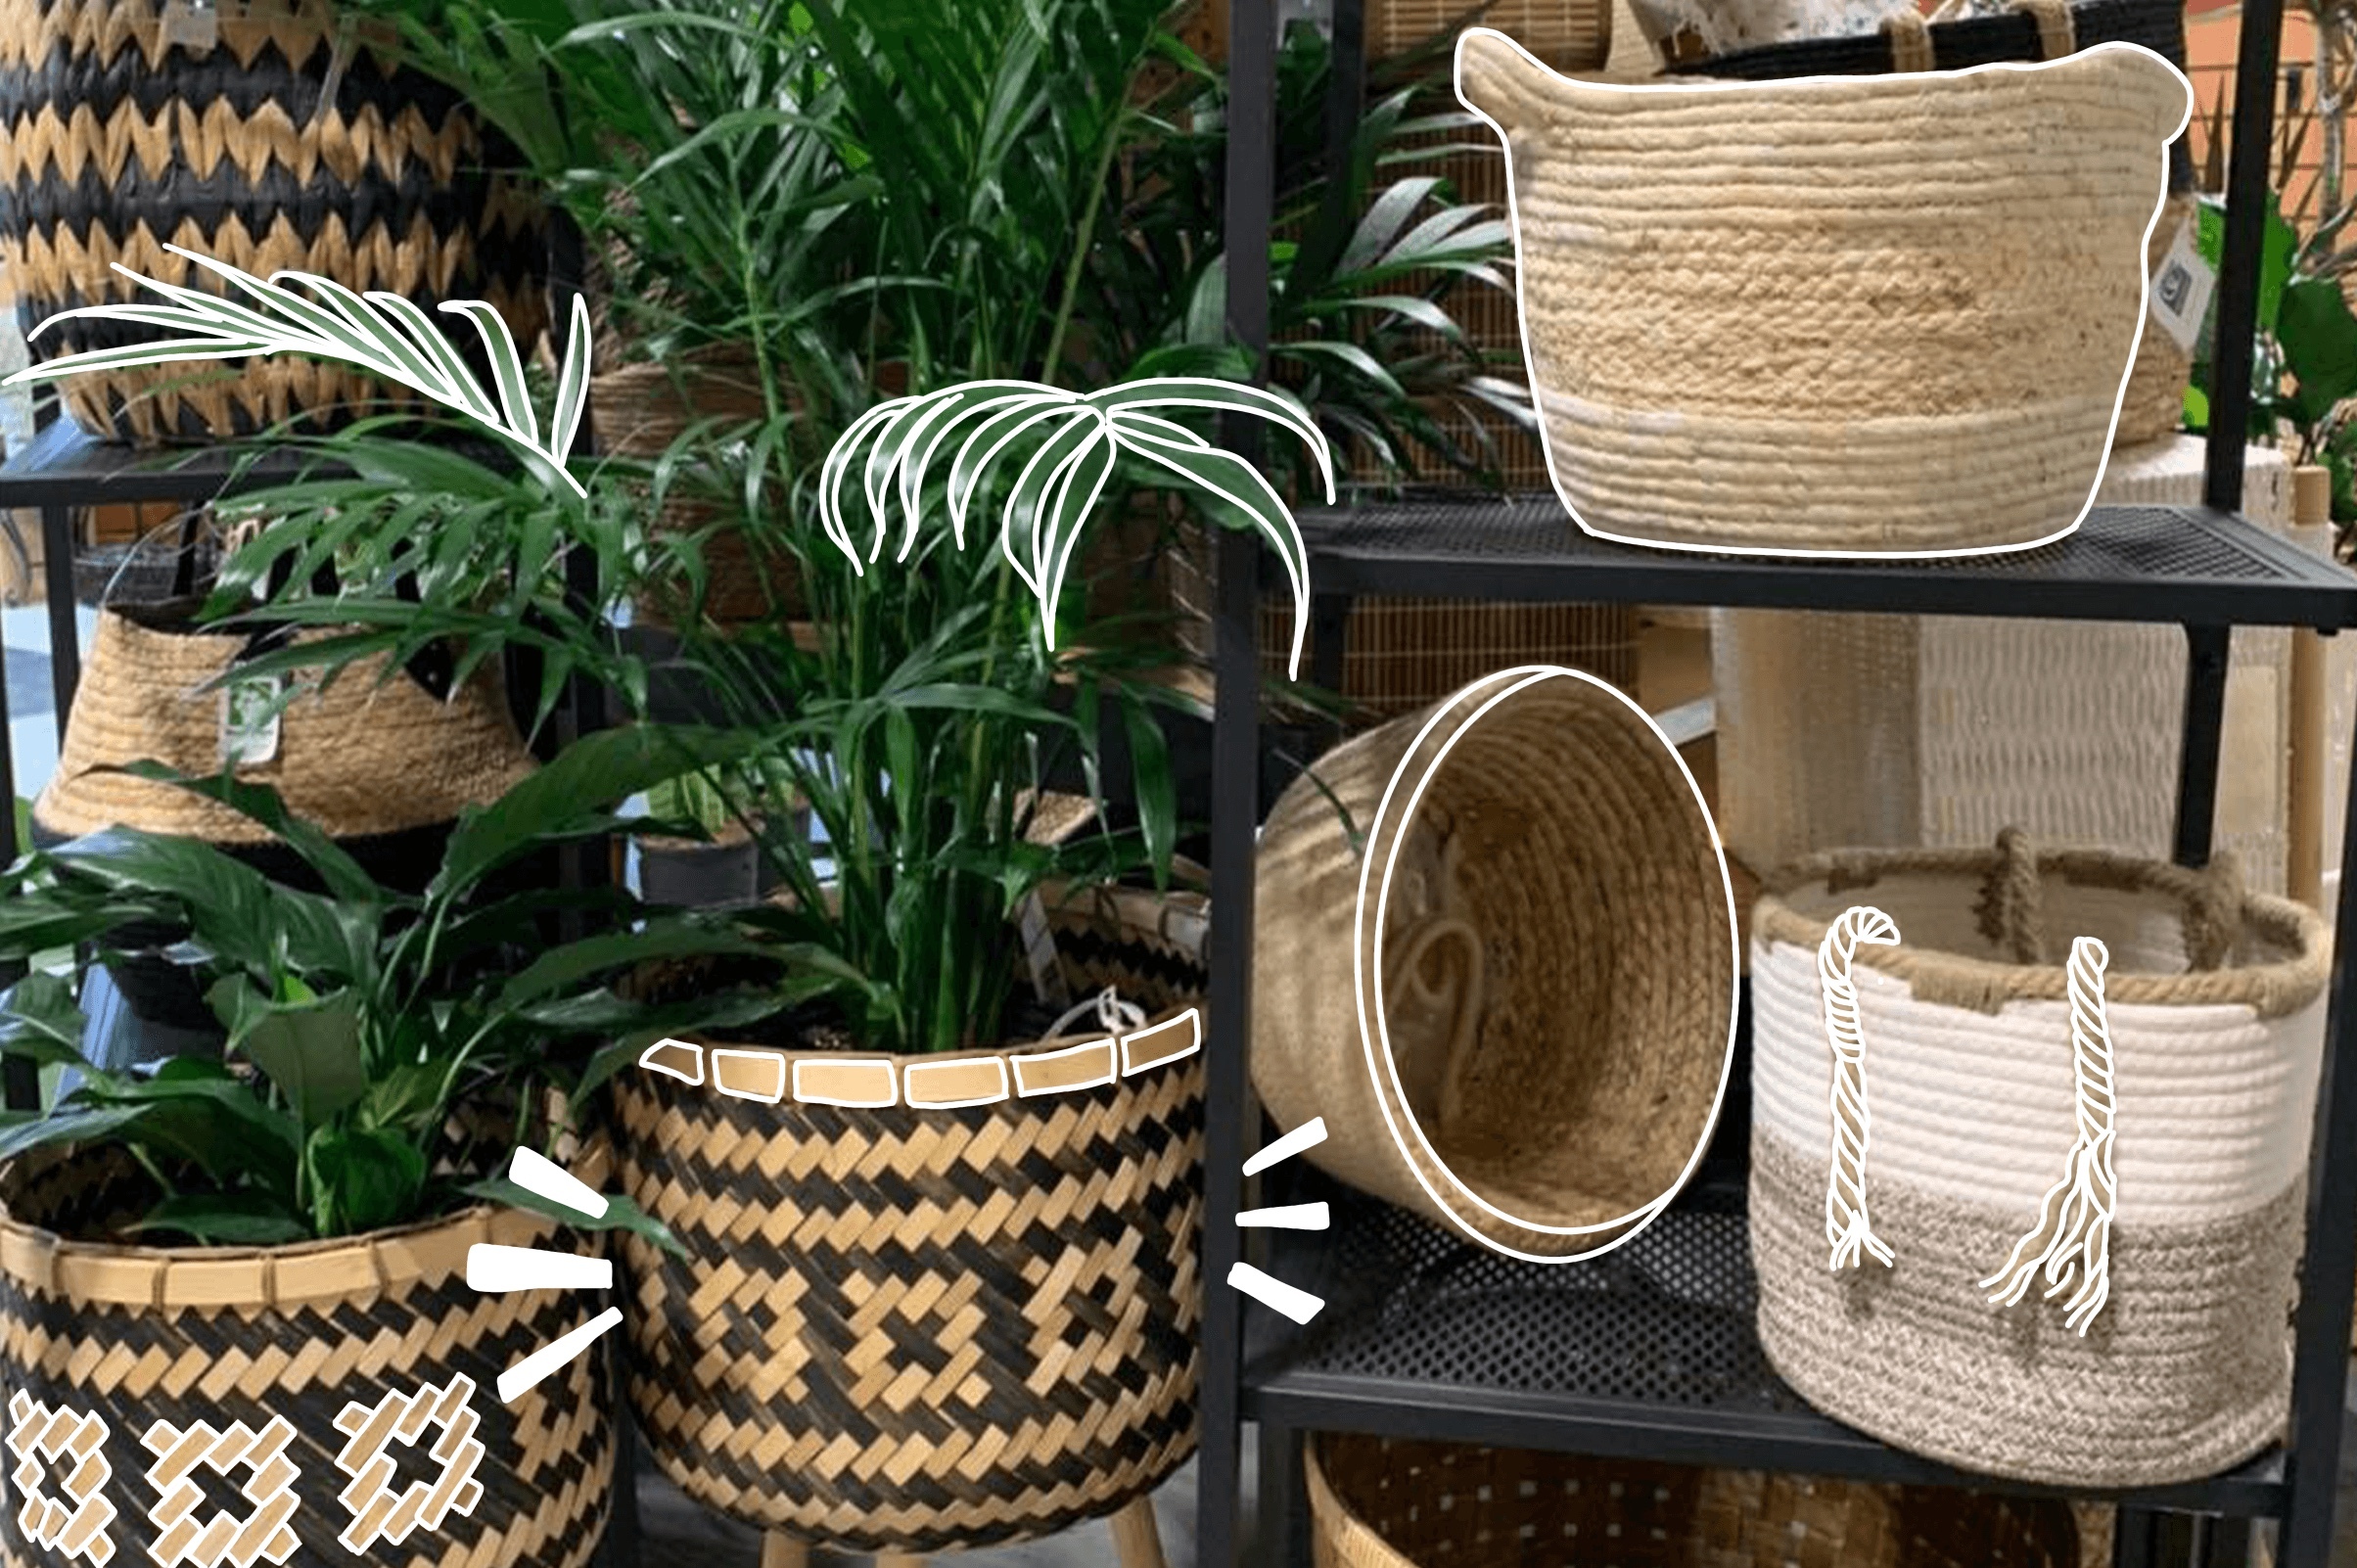 Mother Nature Garden Centre-Choosing the Best Container for Your Houseplants- plant pots for new houseplants